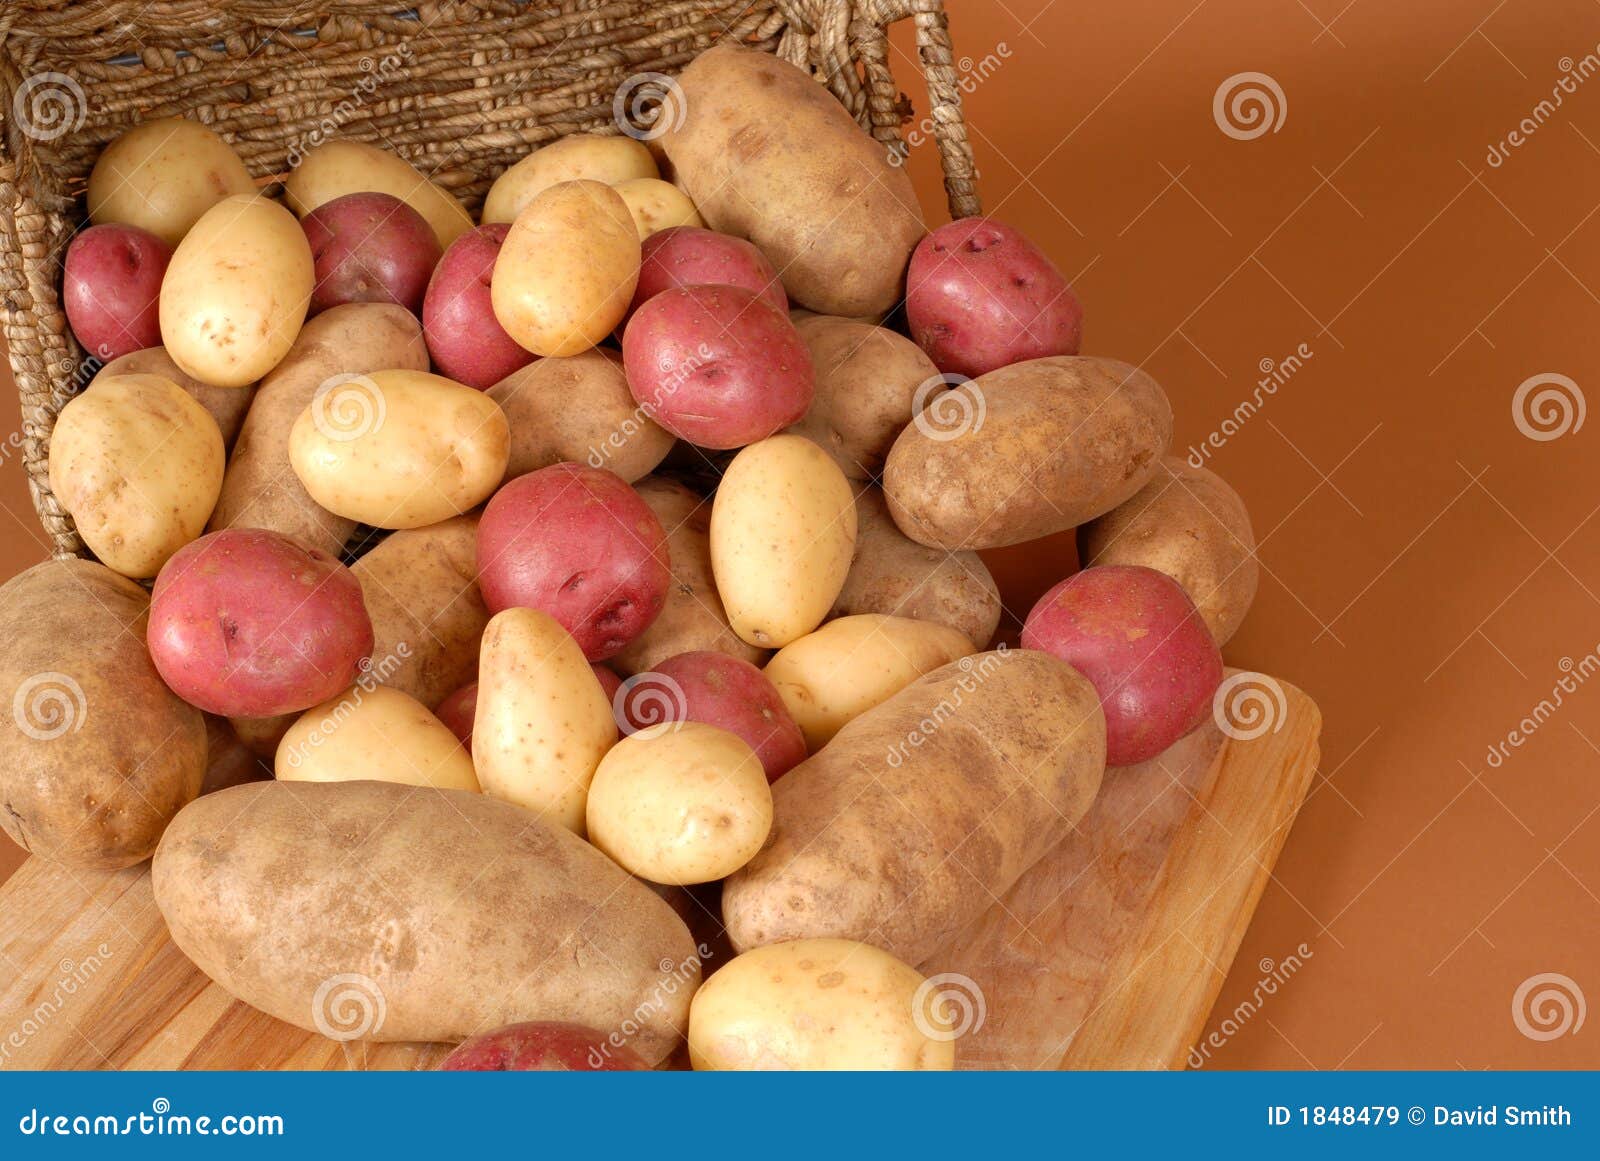 russet, red and white potatoes spilling out of a basket onto cut